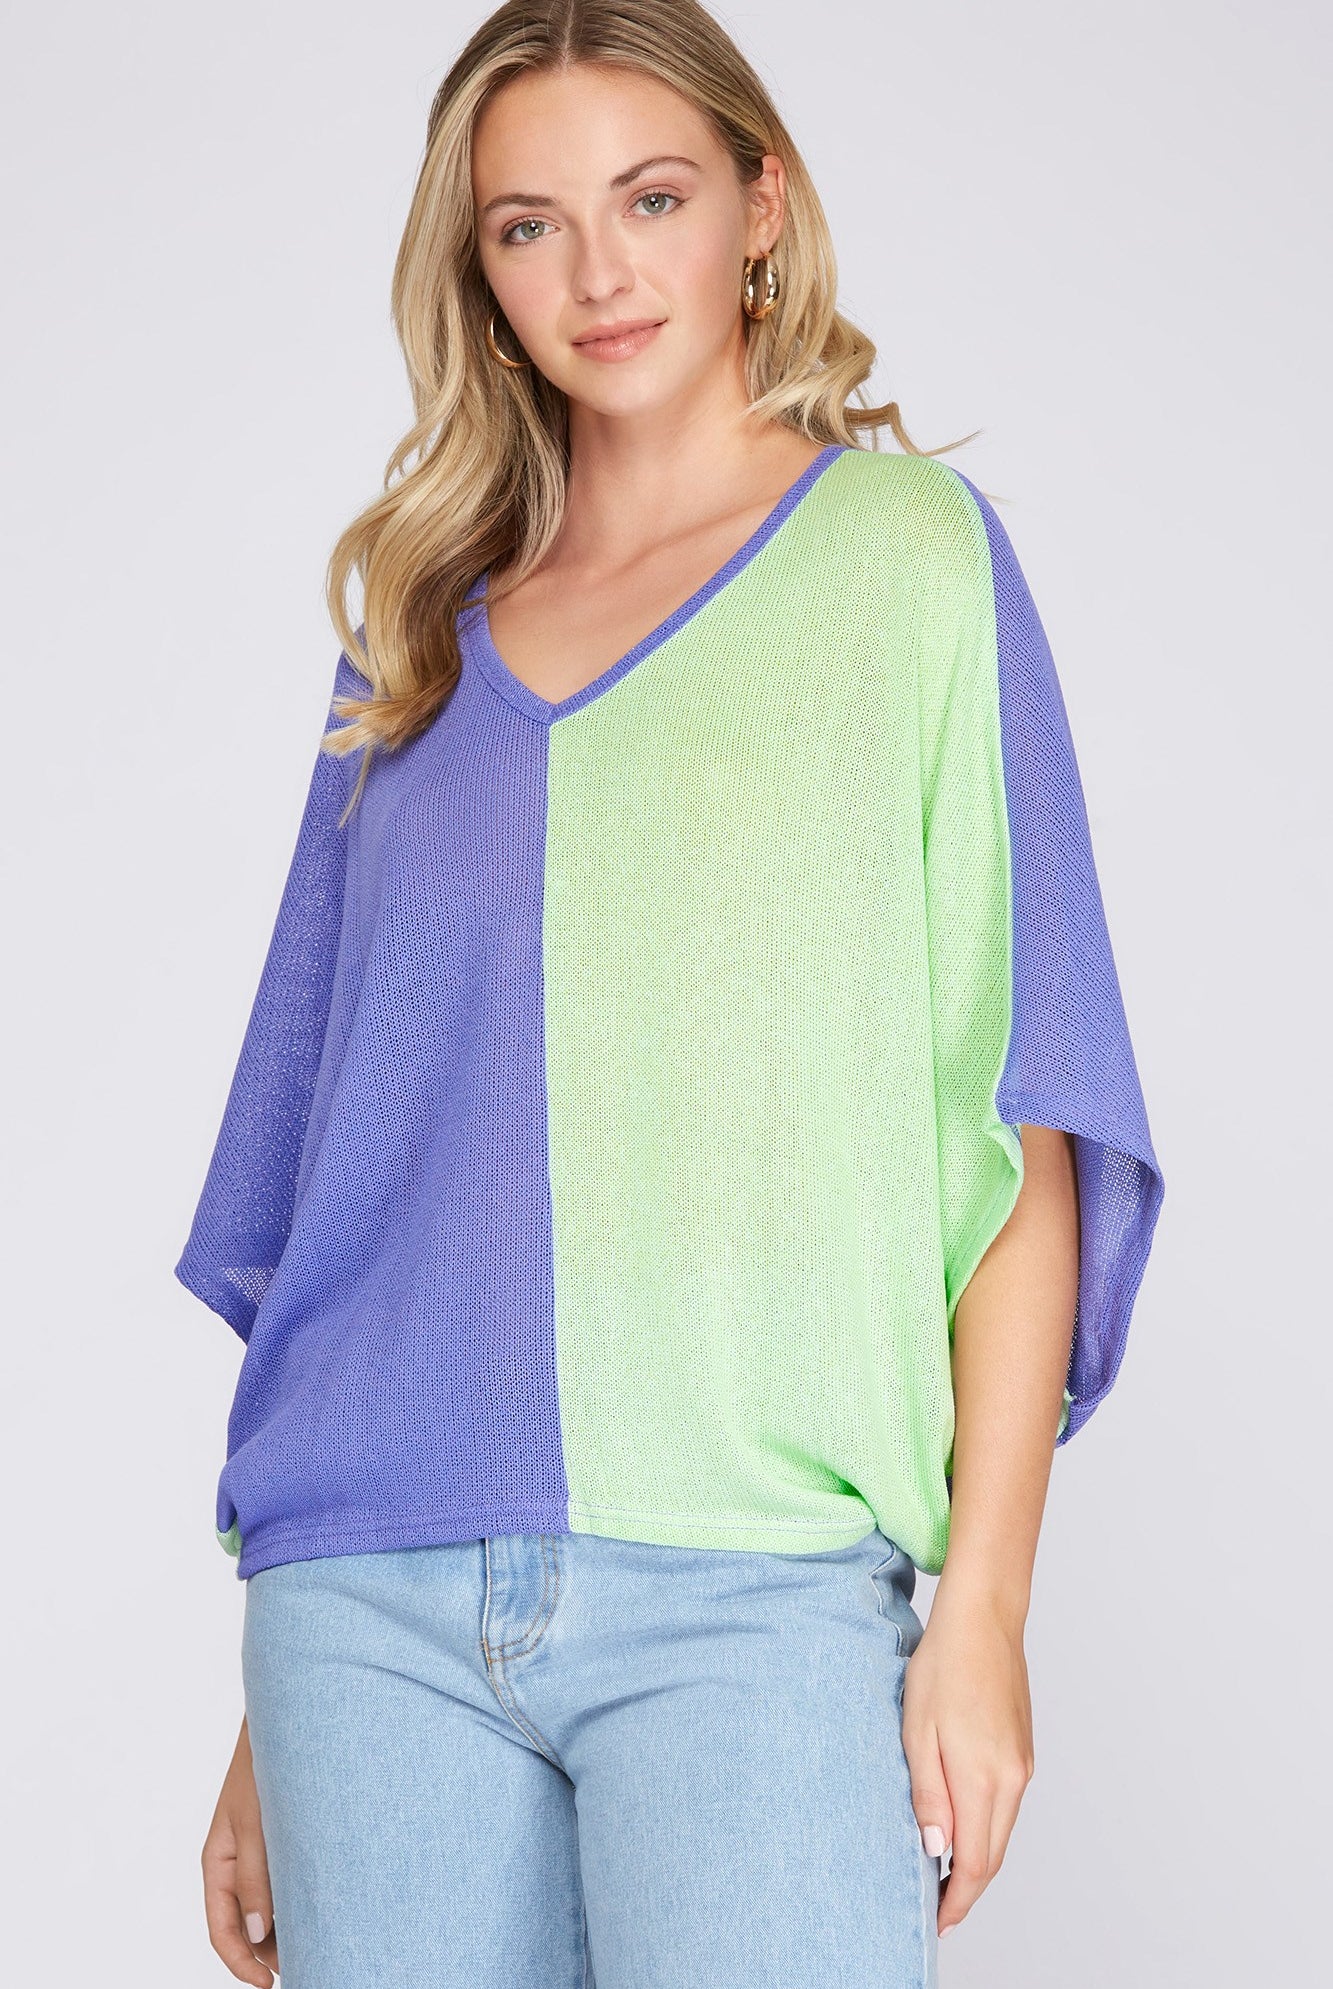 Gianna Drop Sleeve Knit Color Block Top - Be You Boutique